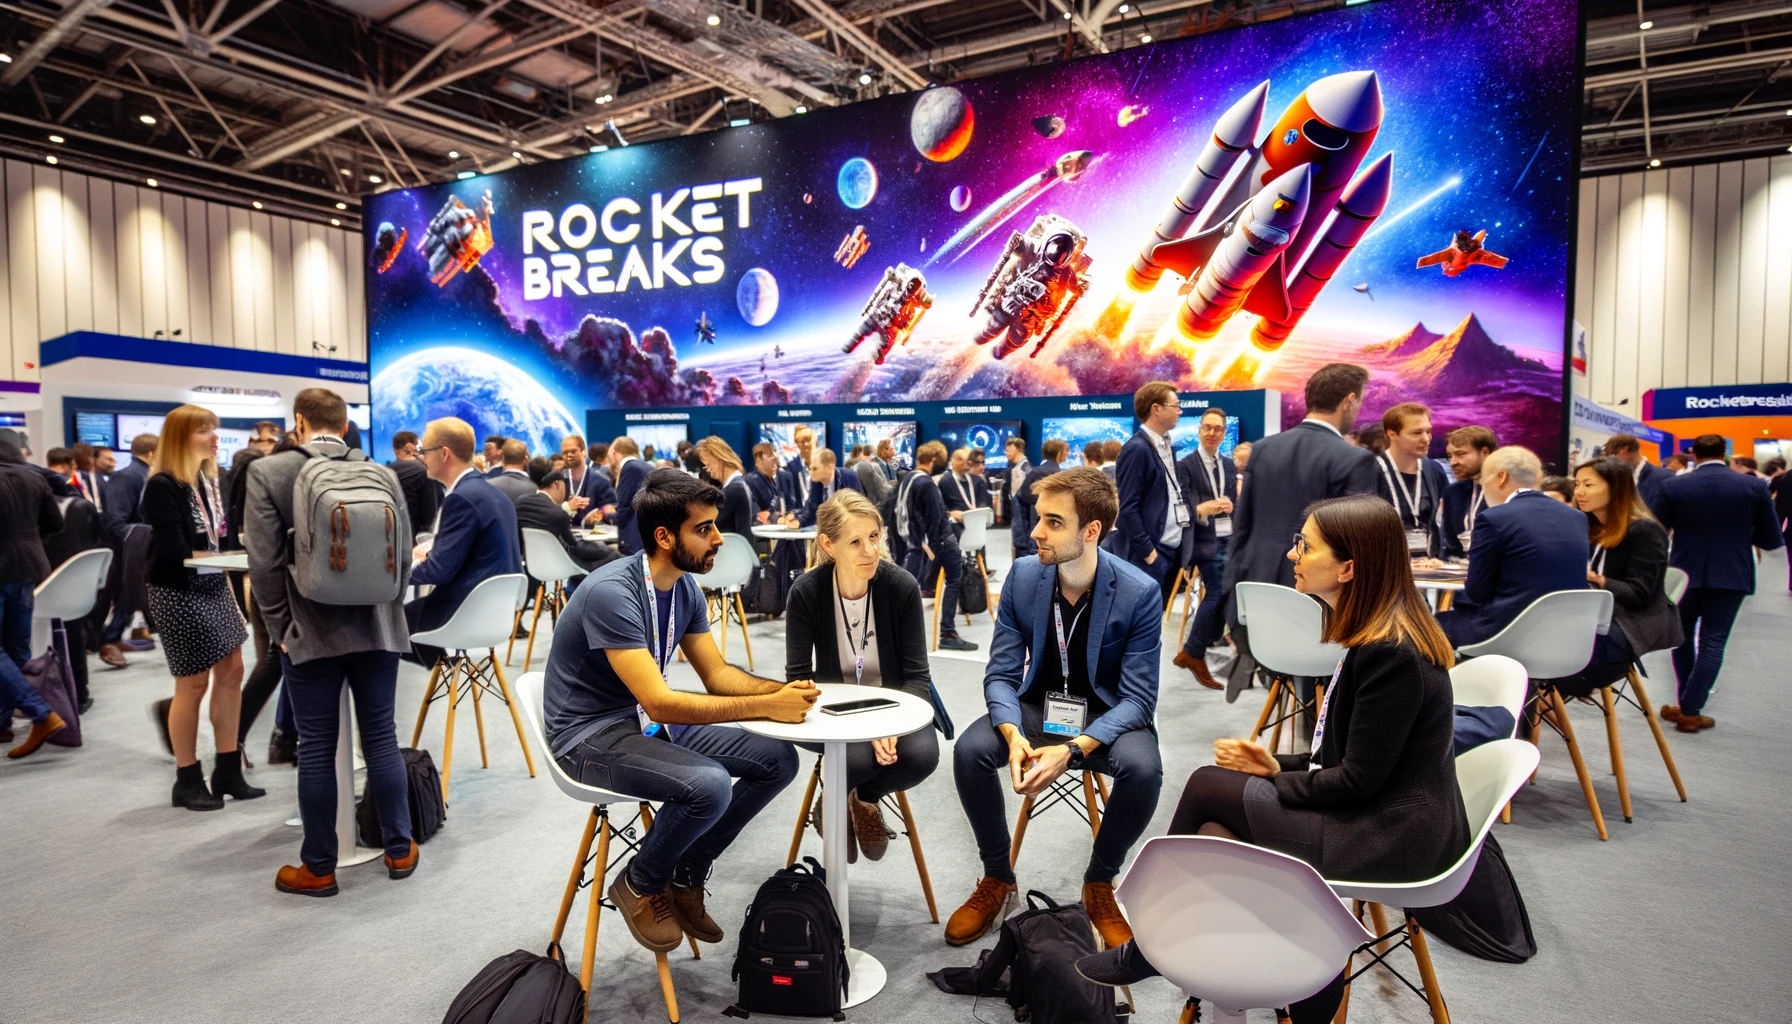 An animated scene from the RocketBreaks Business Show at London's Excel Centre. The image vividly portrays the bustling RocketBreaks booth, filled with a diverse group of visitors and team members. In the foreground, a Caucasian woman and an Asian man, identified as RocketBreaks directors, are actively conversing with attendees about space tourism. The backdrop is adorned with striking space-themed visuals and interactive exhibits, showcasing RocketBreaks' innovative approach to space travel experiences